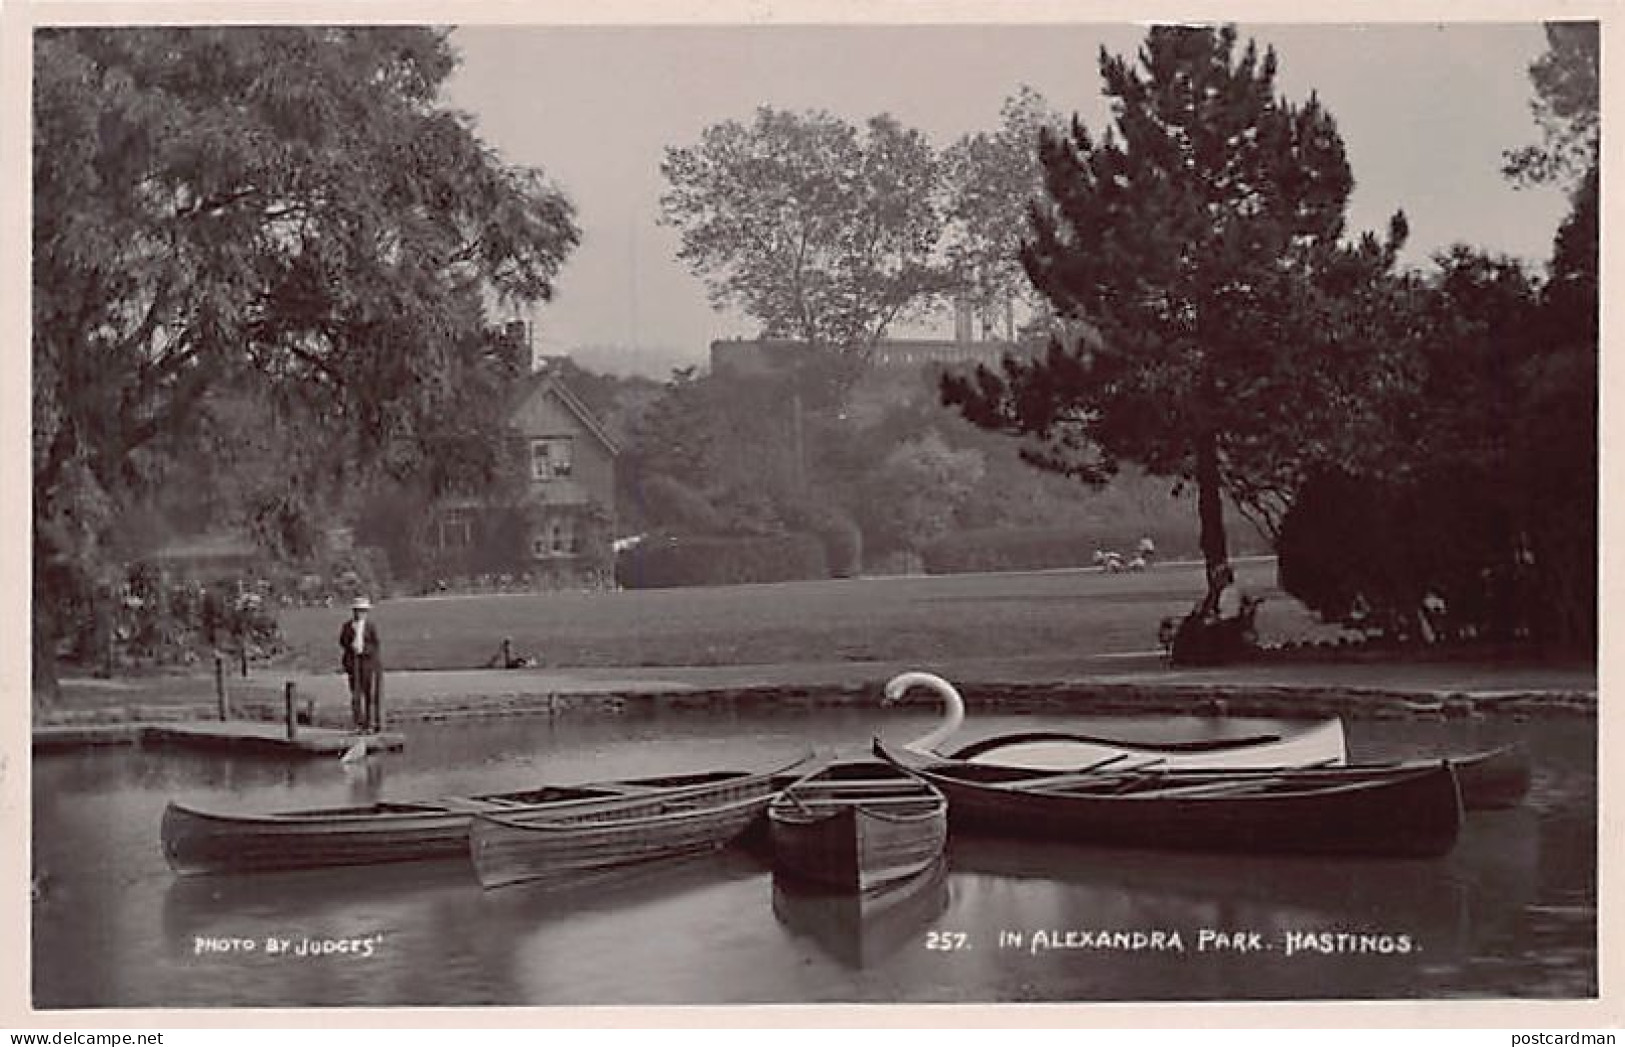 HASTINGS (Sx) In Alexandria Park - REAL PHOTO - Publ. Judges 257 - Hastings